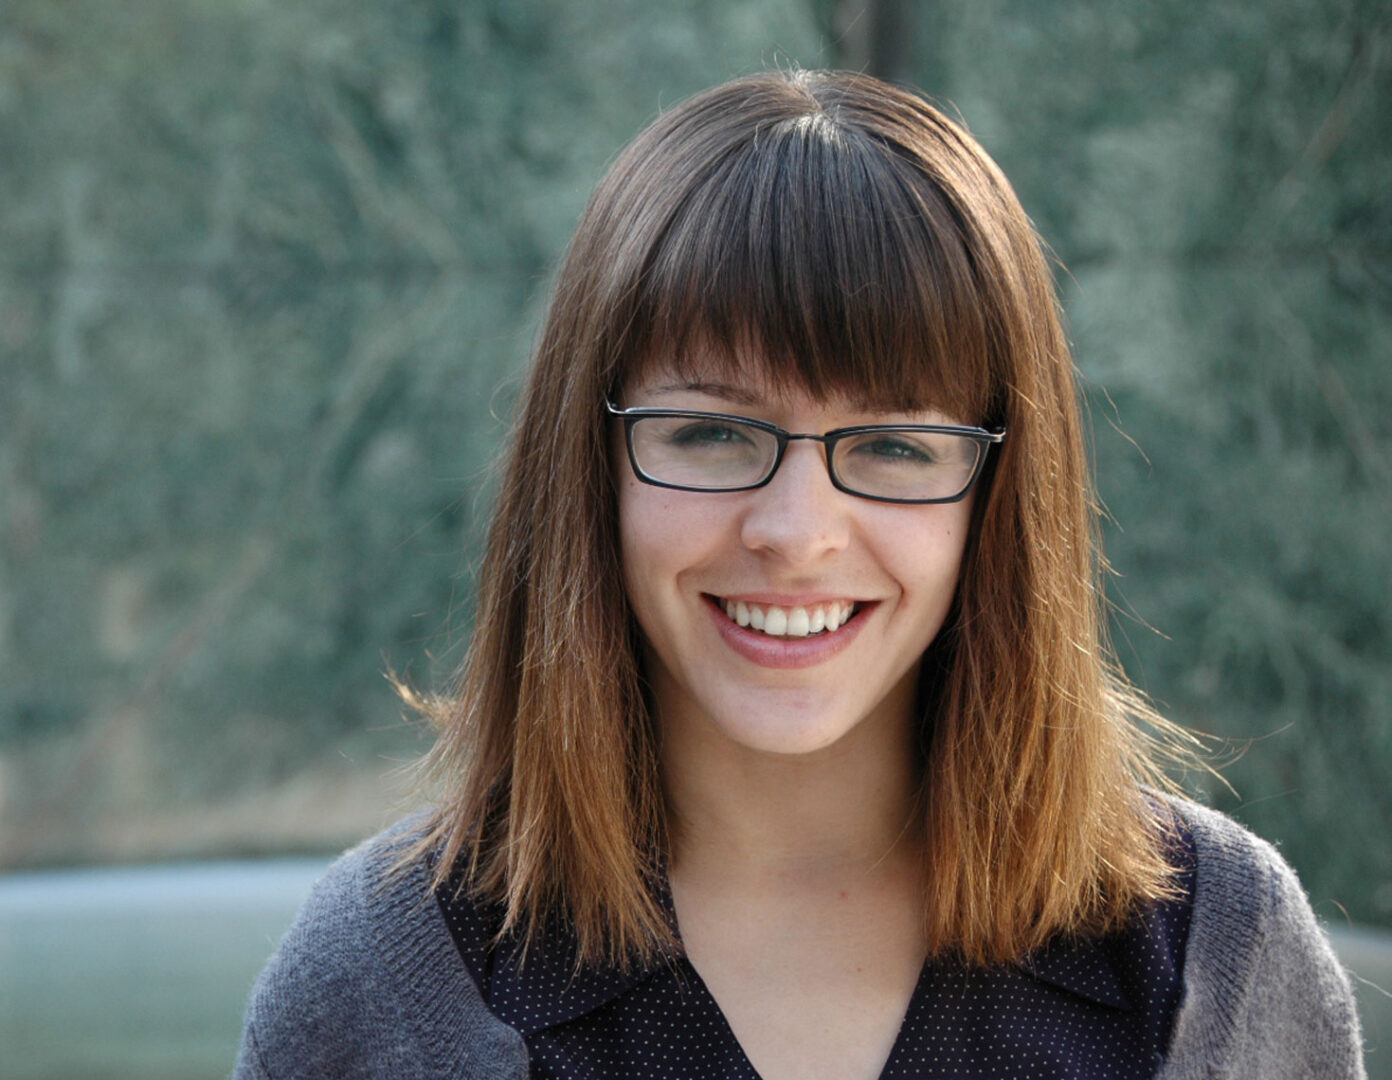 colored headshot photograph of woman with bangs and glasses